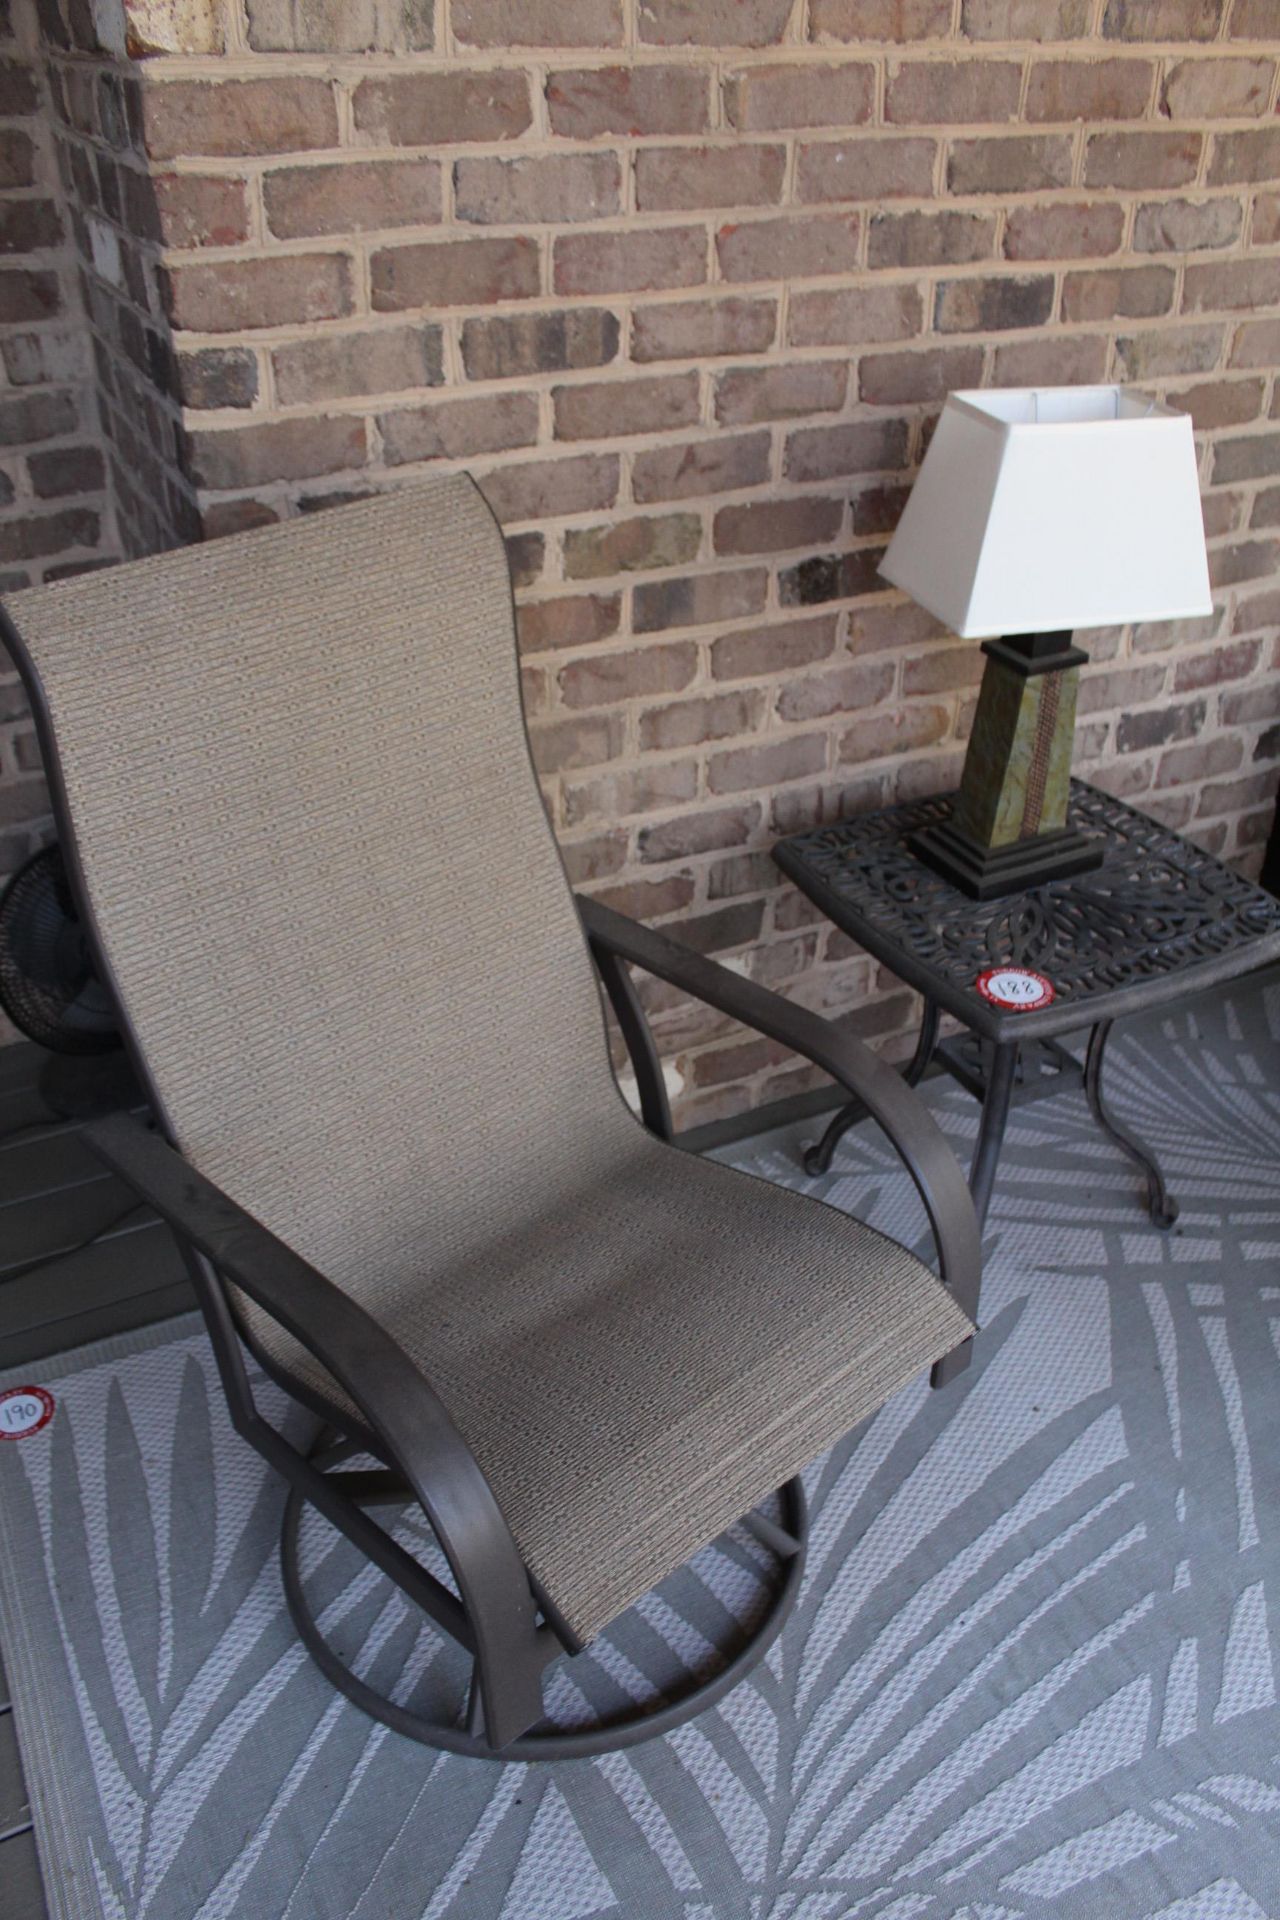 Set of 4 Patio Chairs with Beige Upholstery, Two Iron Side Tables & Two Ottomans & One Sun Lounger - Image 3 of 3